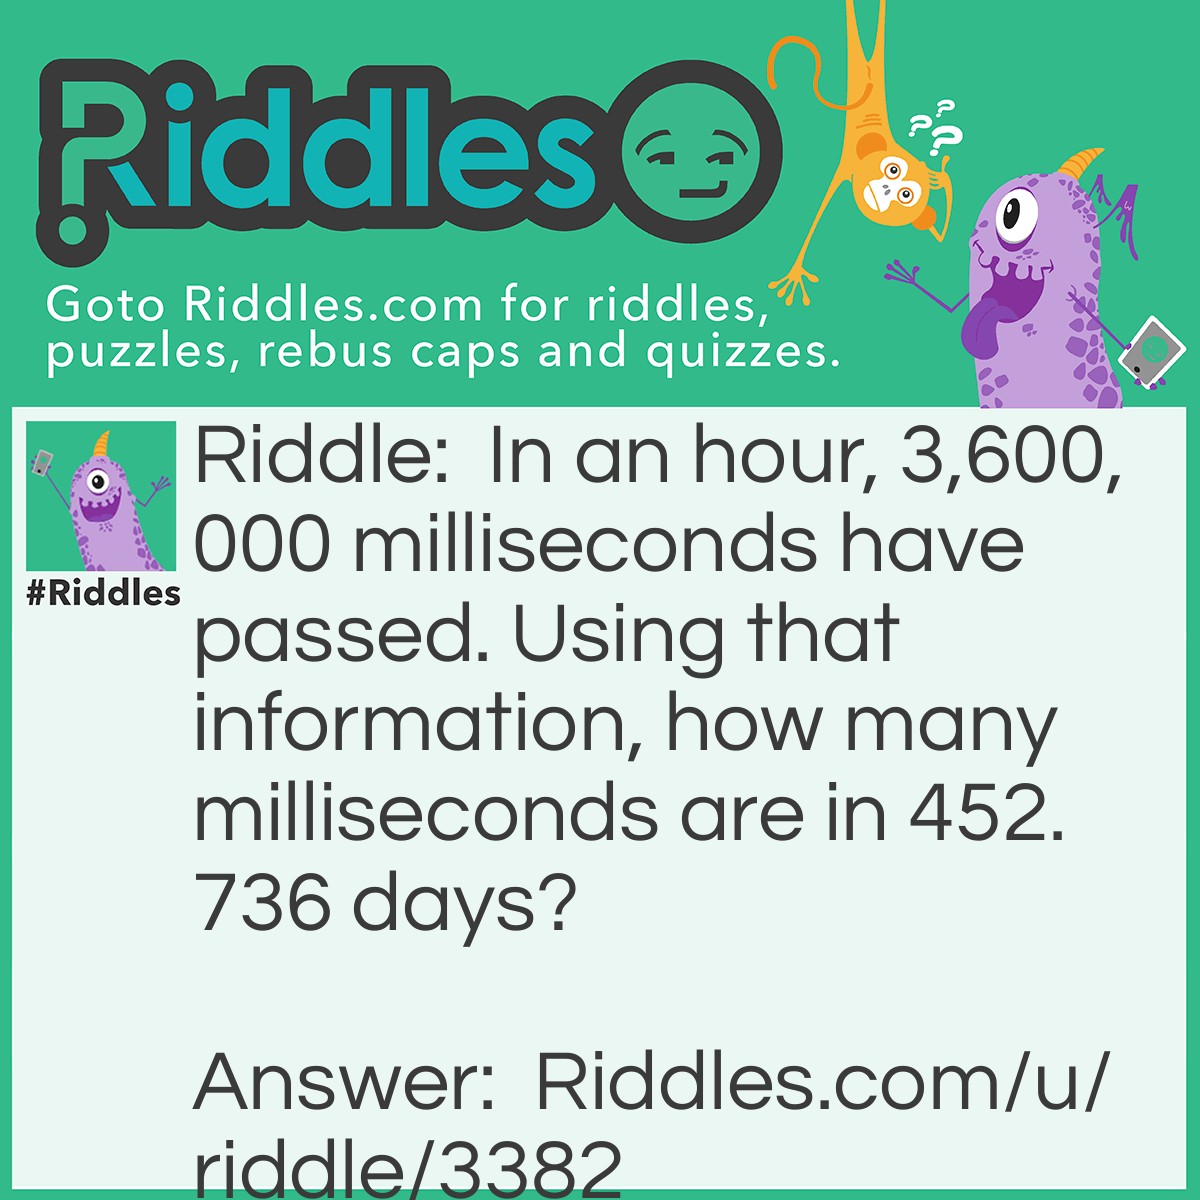 Riddle: In an hour, 3,600,000 milliseconds have passed. Using that information, how many milliseconds are in 452.736 days? Answer: 39,116,390,400 milliseconds in the period of time.